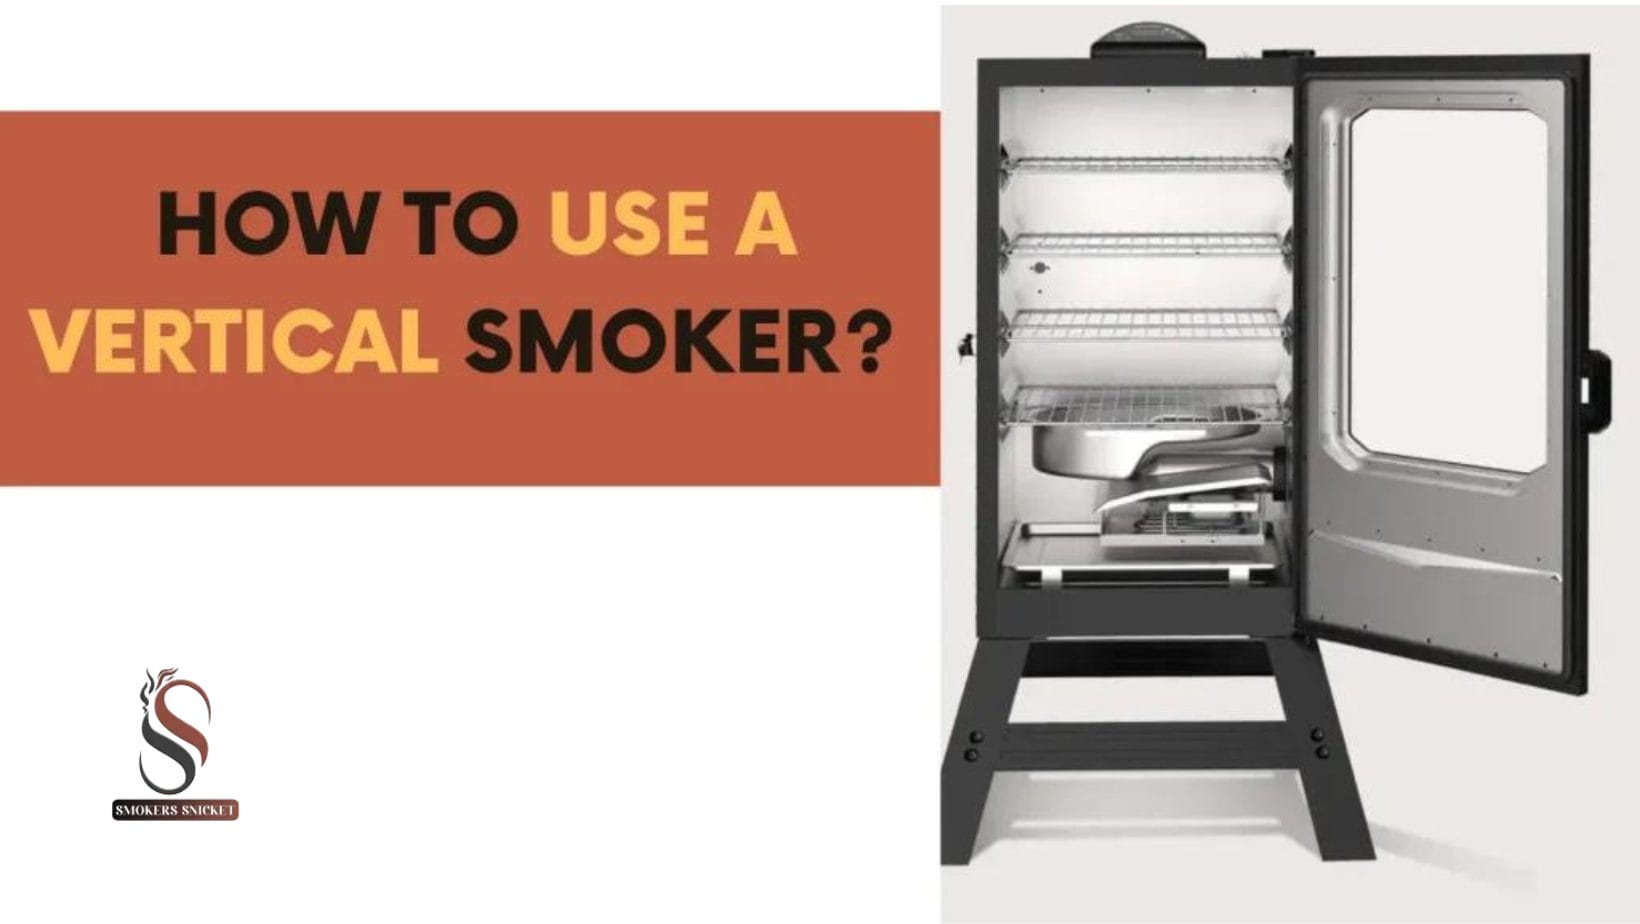 A COMPREHENSIVE GUIDE ON HOW TO USE A VERTICAL SMOKER